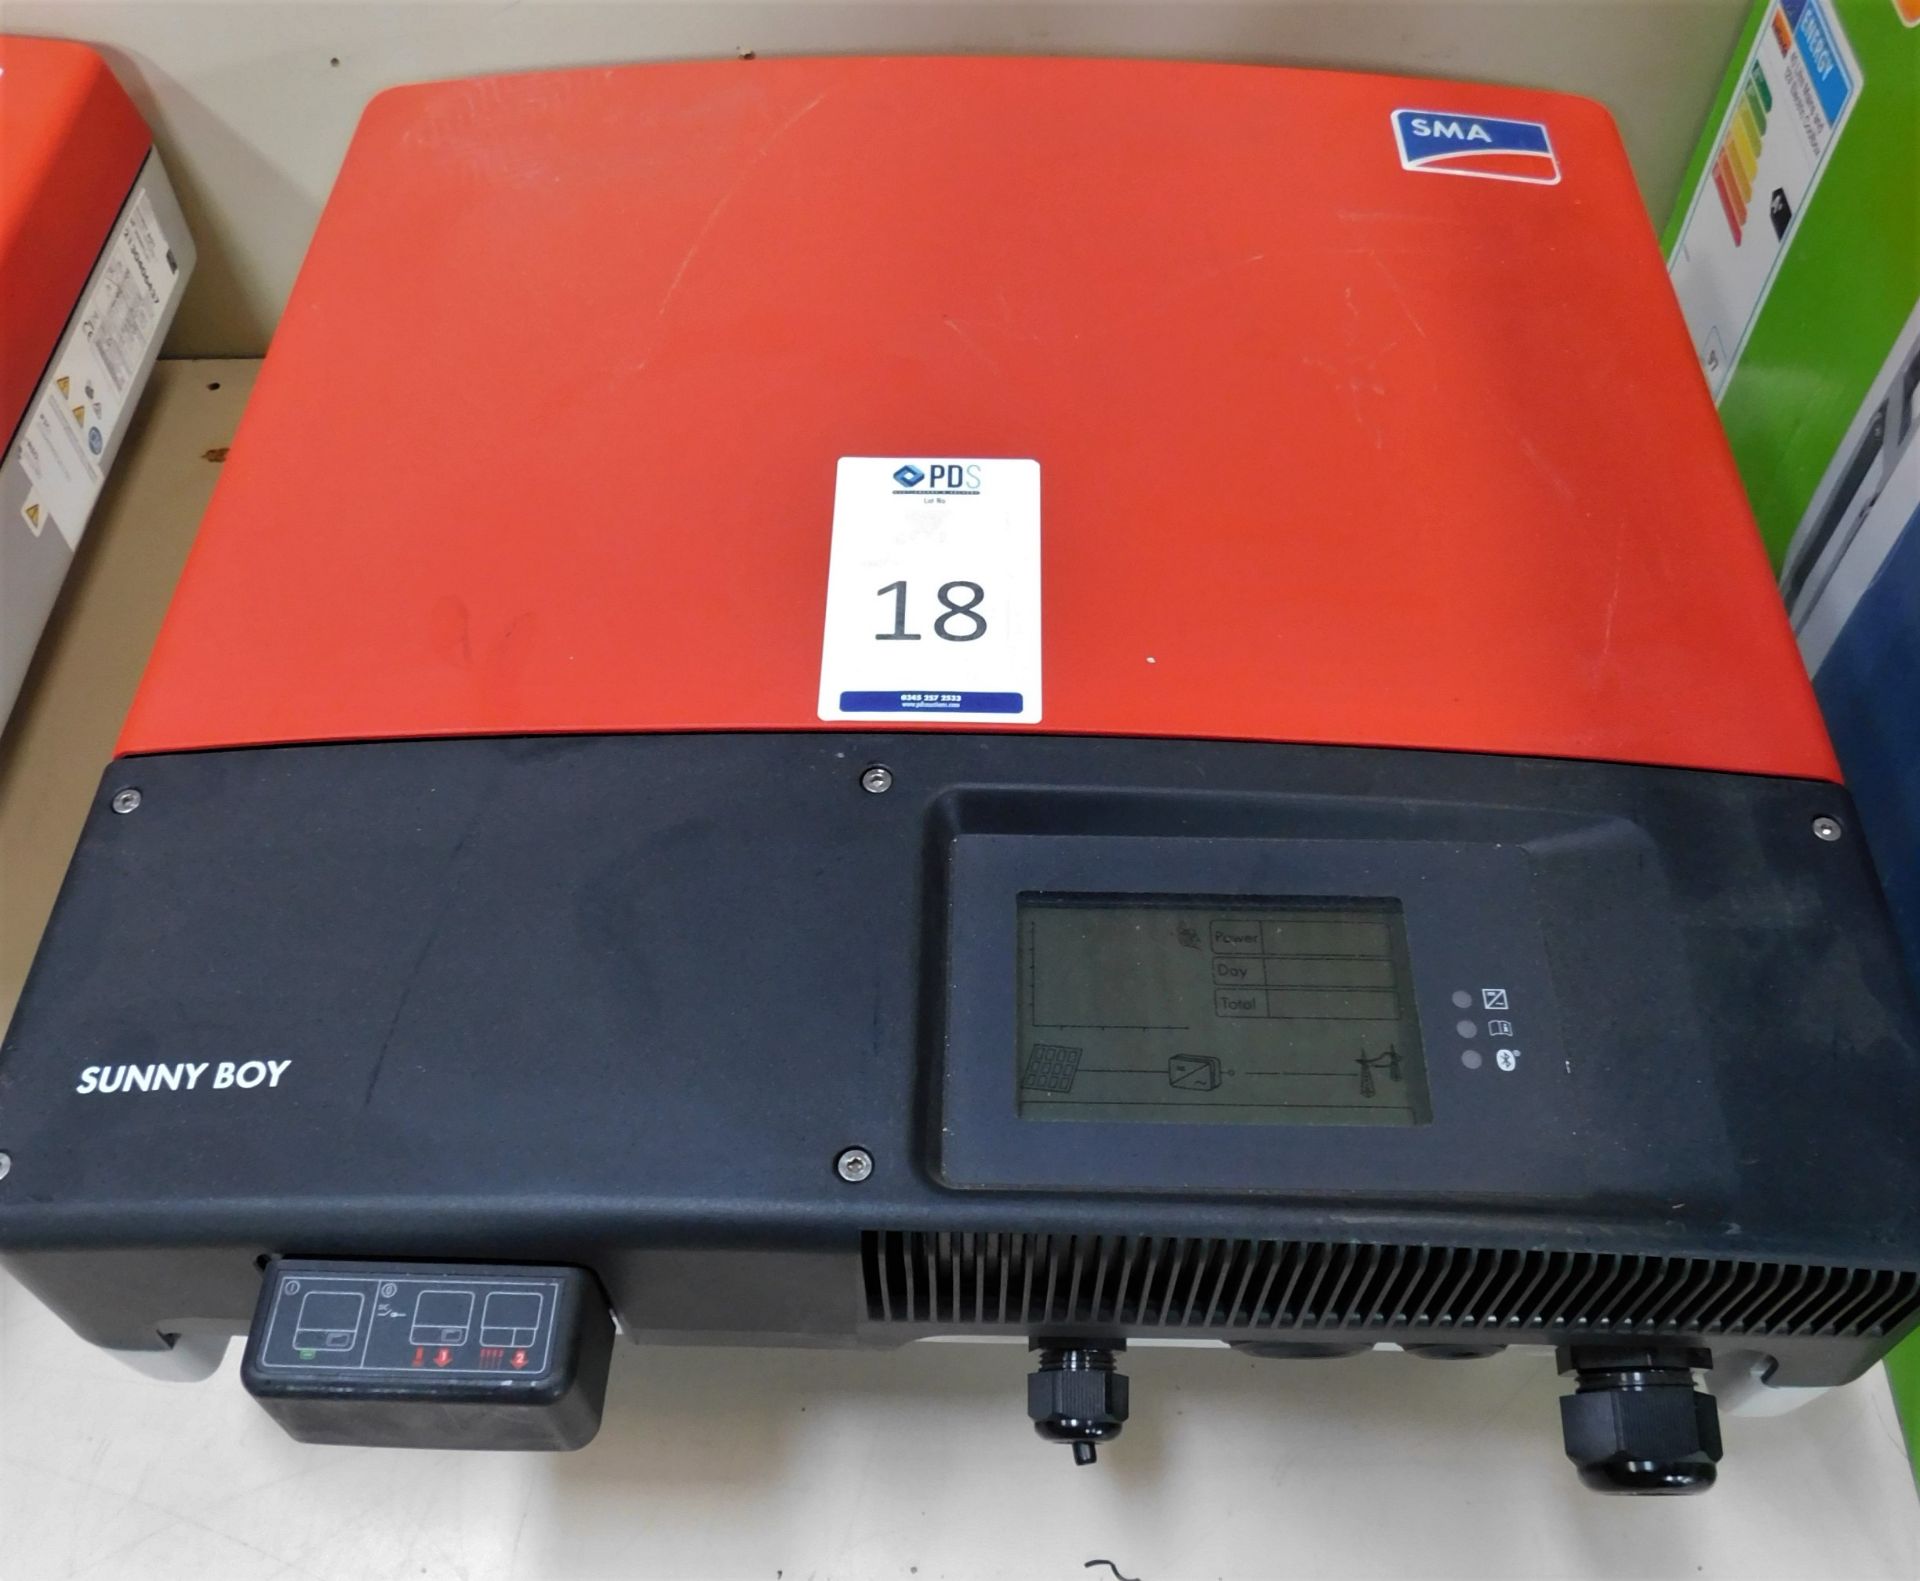 SMA “Sunny Boy” SB3600TL-21 Solar Inverter (Location: Brentwood: Please Refer to General Notes)